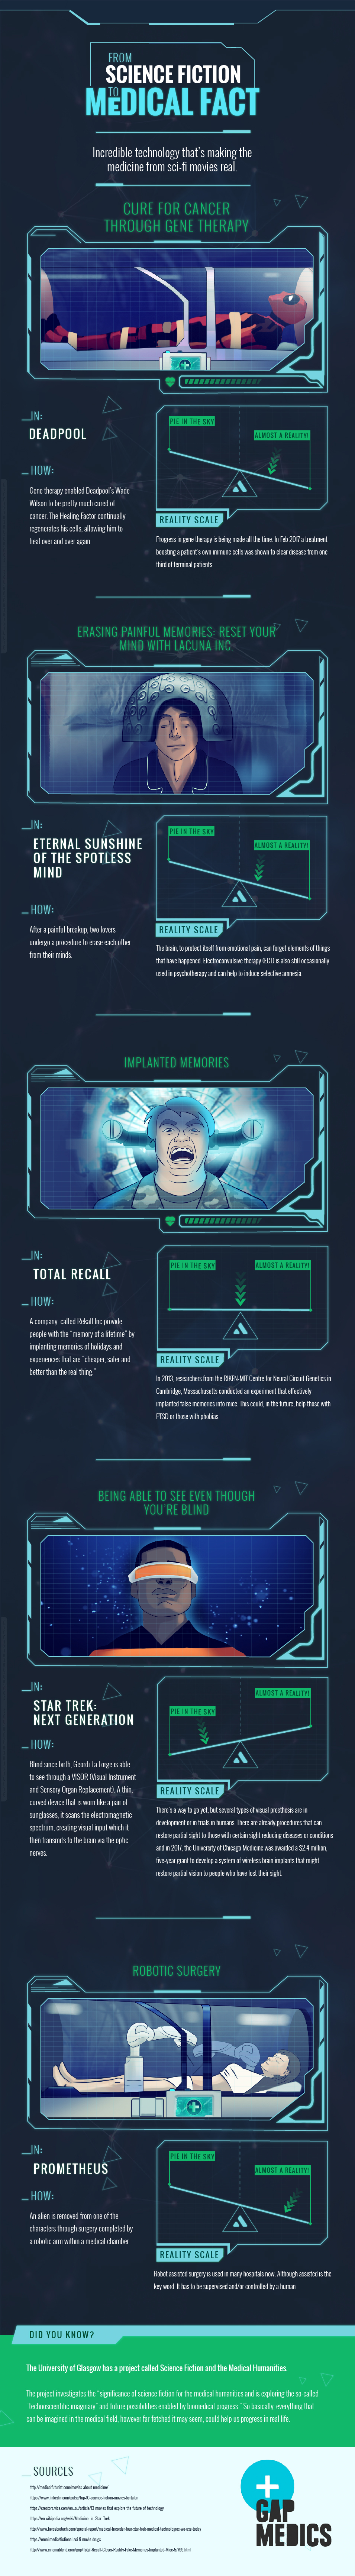 Medicine in science fiction infographic